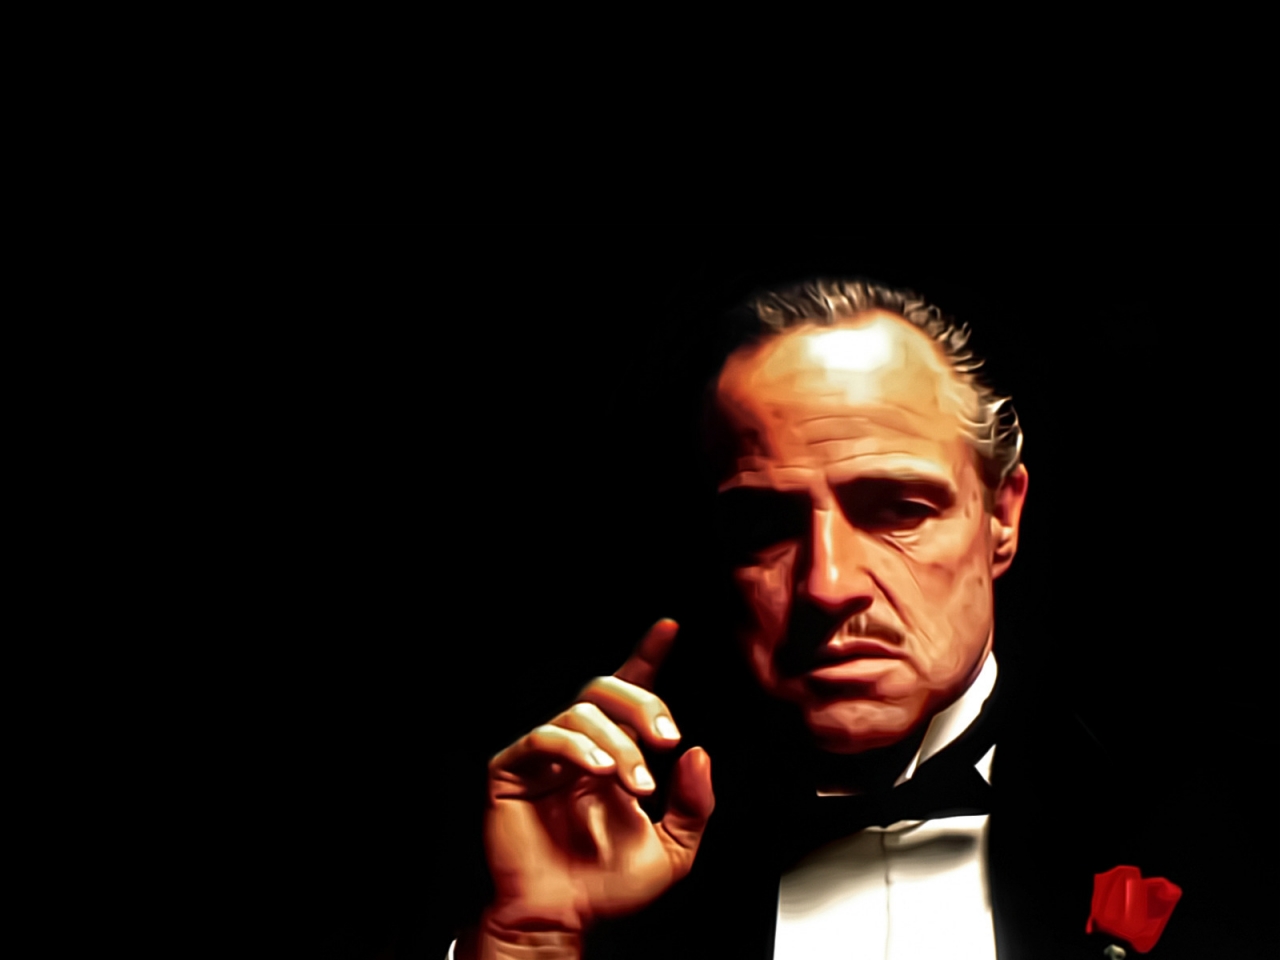 The Godfather Painting for 1280 x 960 resolution